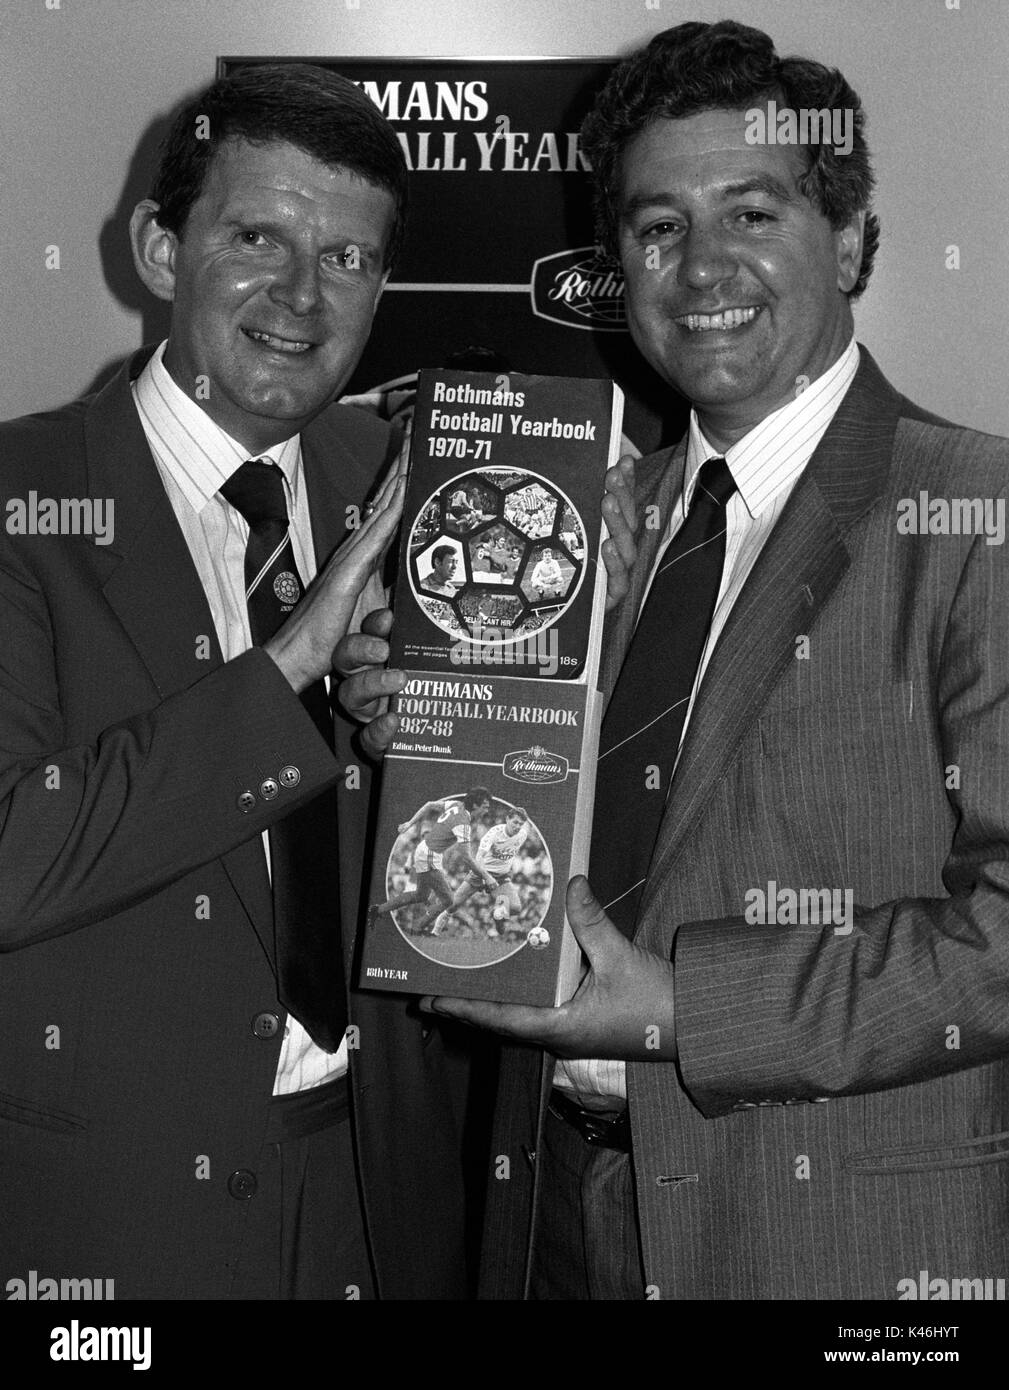 Sports commentator John Motson (l) and Queen's Park Rangers chairman David Hulstrode at the announcement of the Rothman's 1987 Football Yearbook Awards in London. Stock Photo